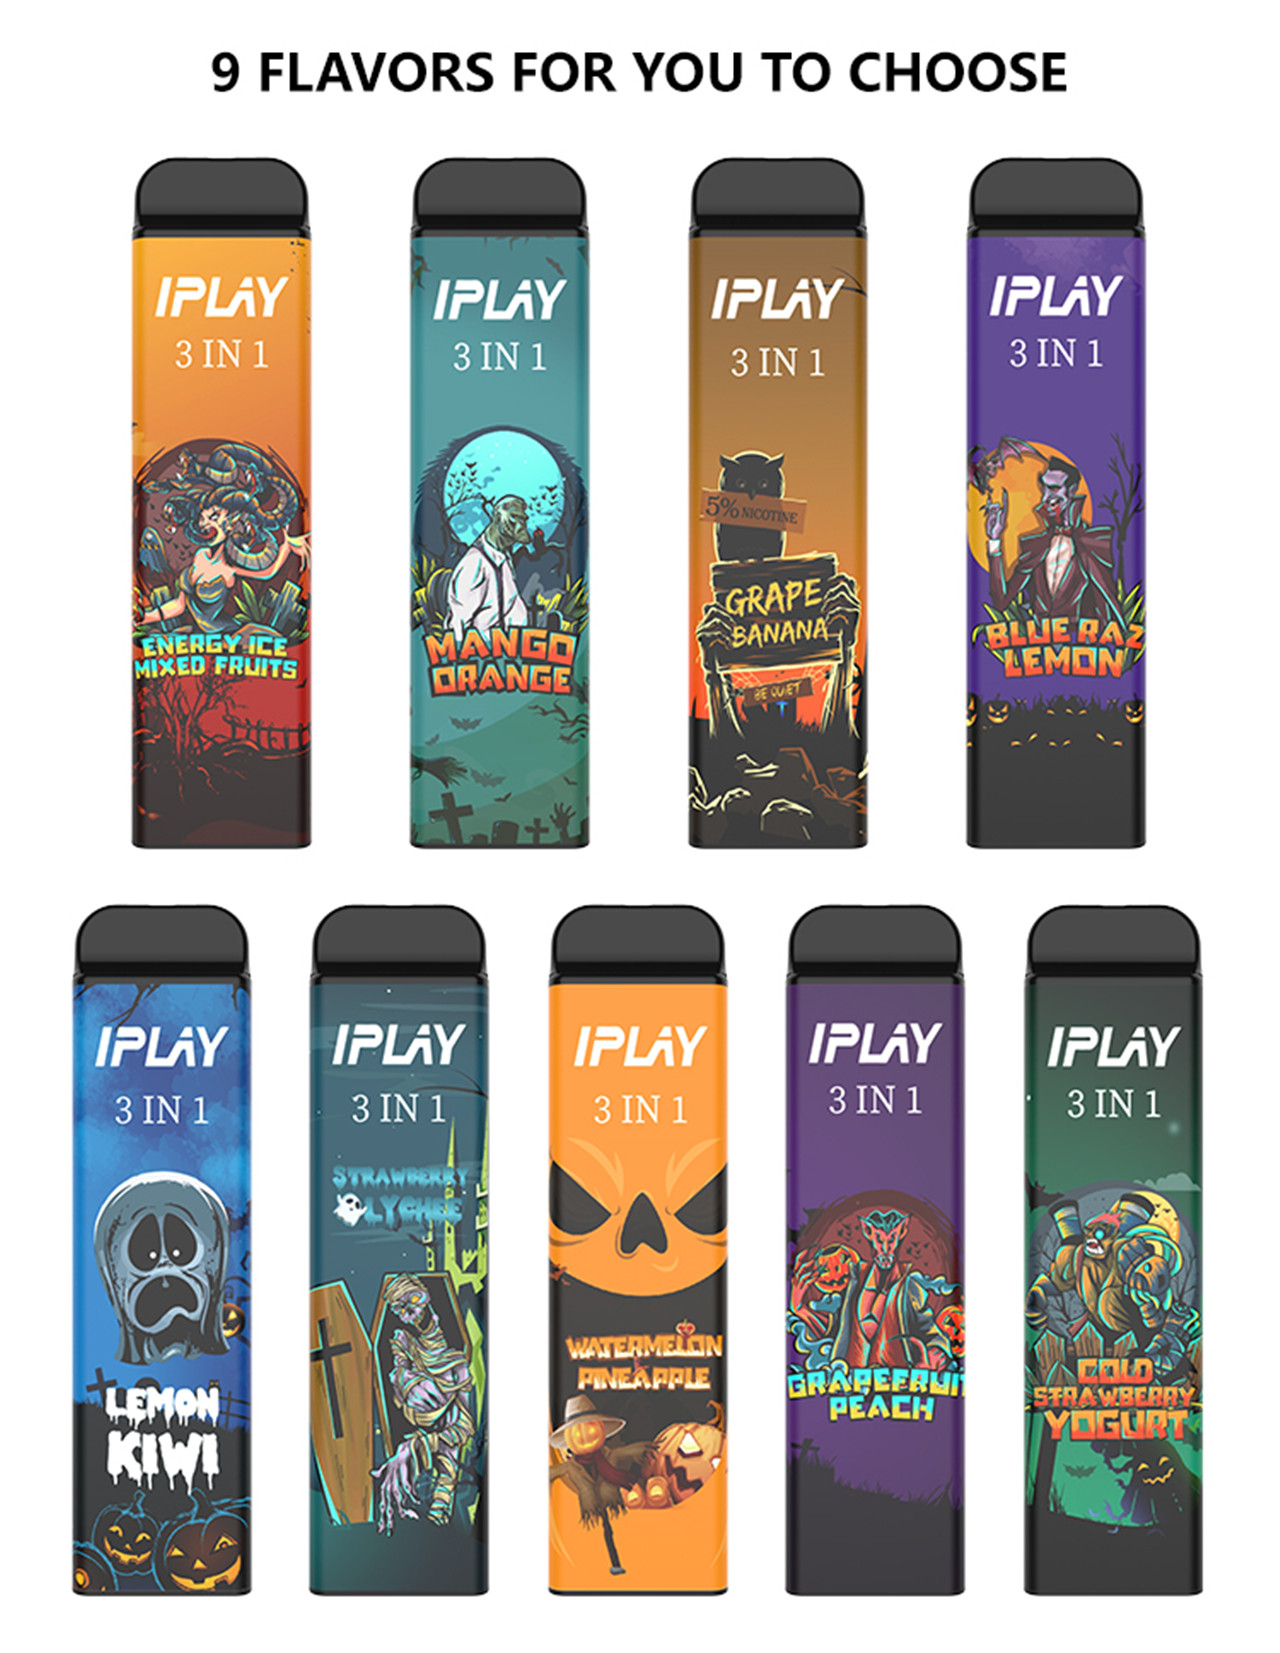 IPLAY 3 IN 1 Disposable Pod - 9 flavors